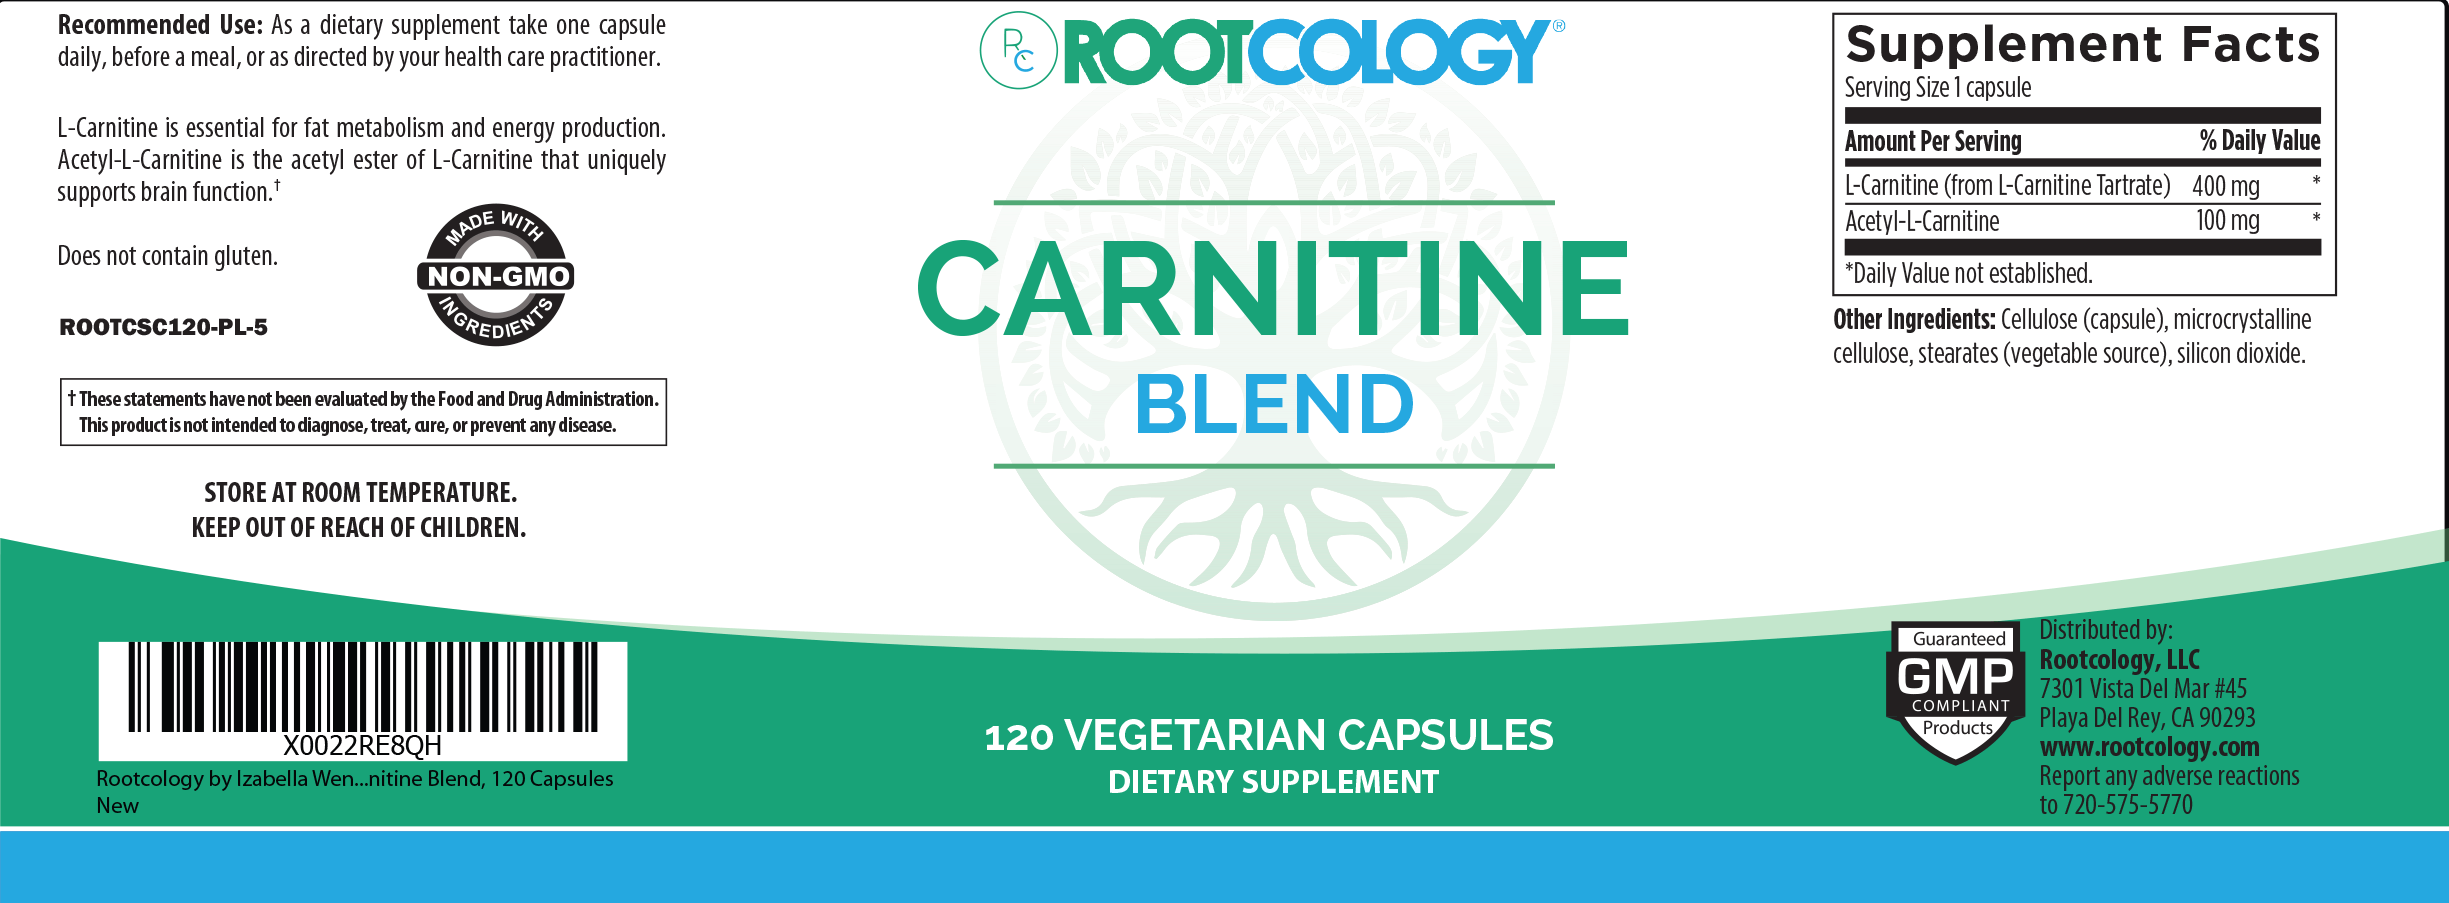 Rootcology Carnitine Blend Supplement Label